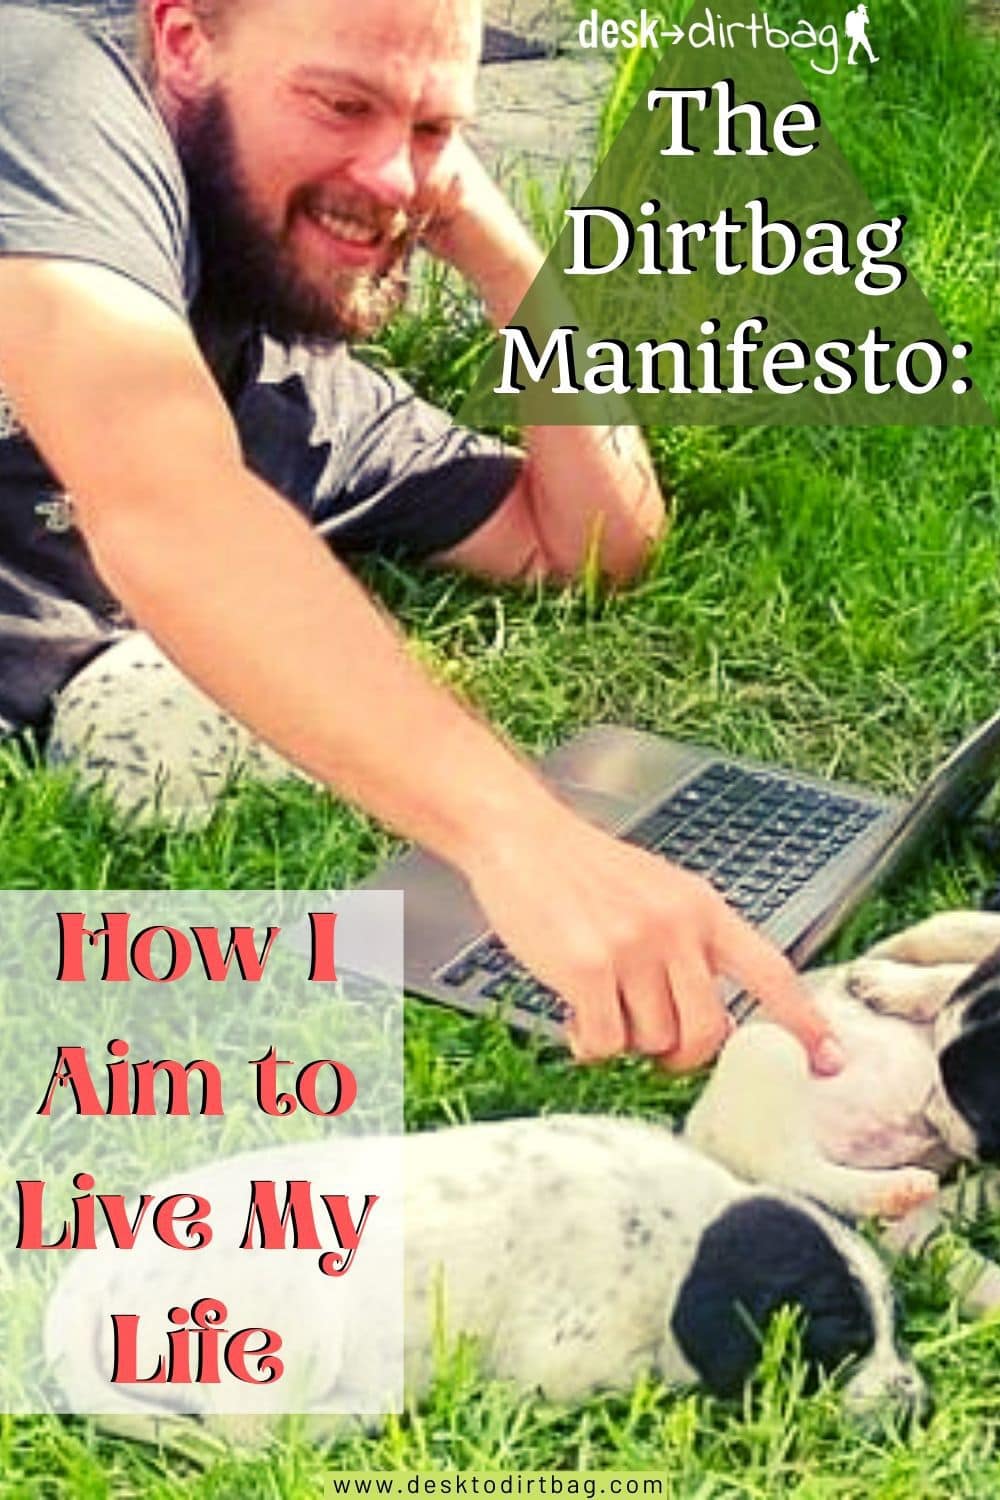 The Dirtbag Manifesto: How I Aim to Live My Life featured